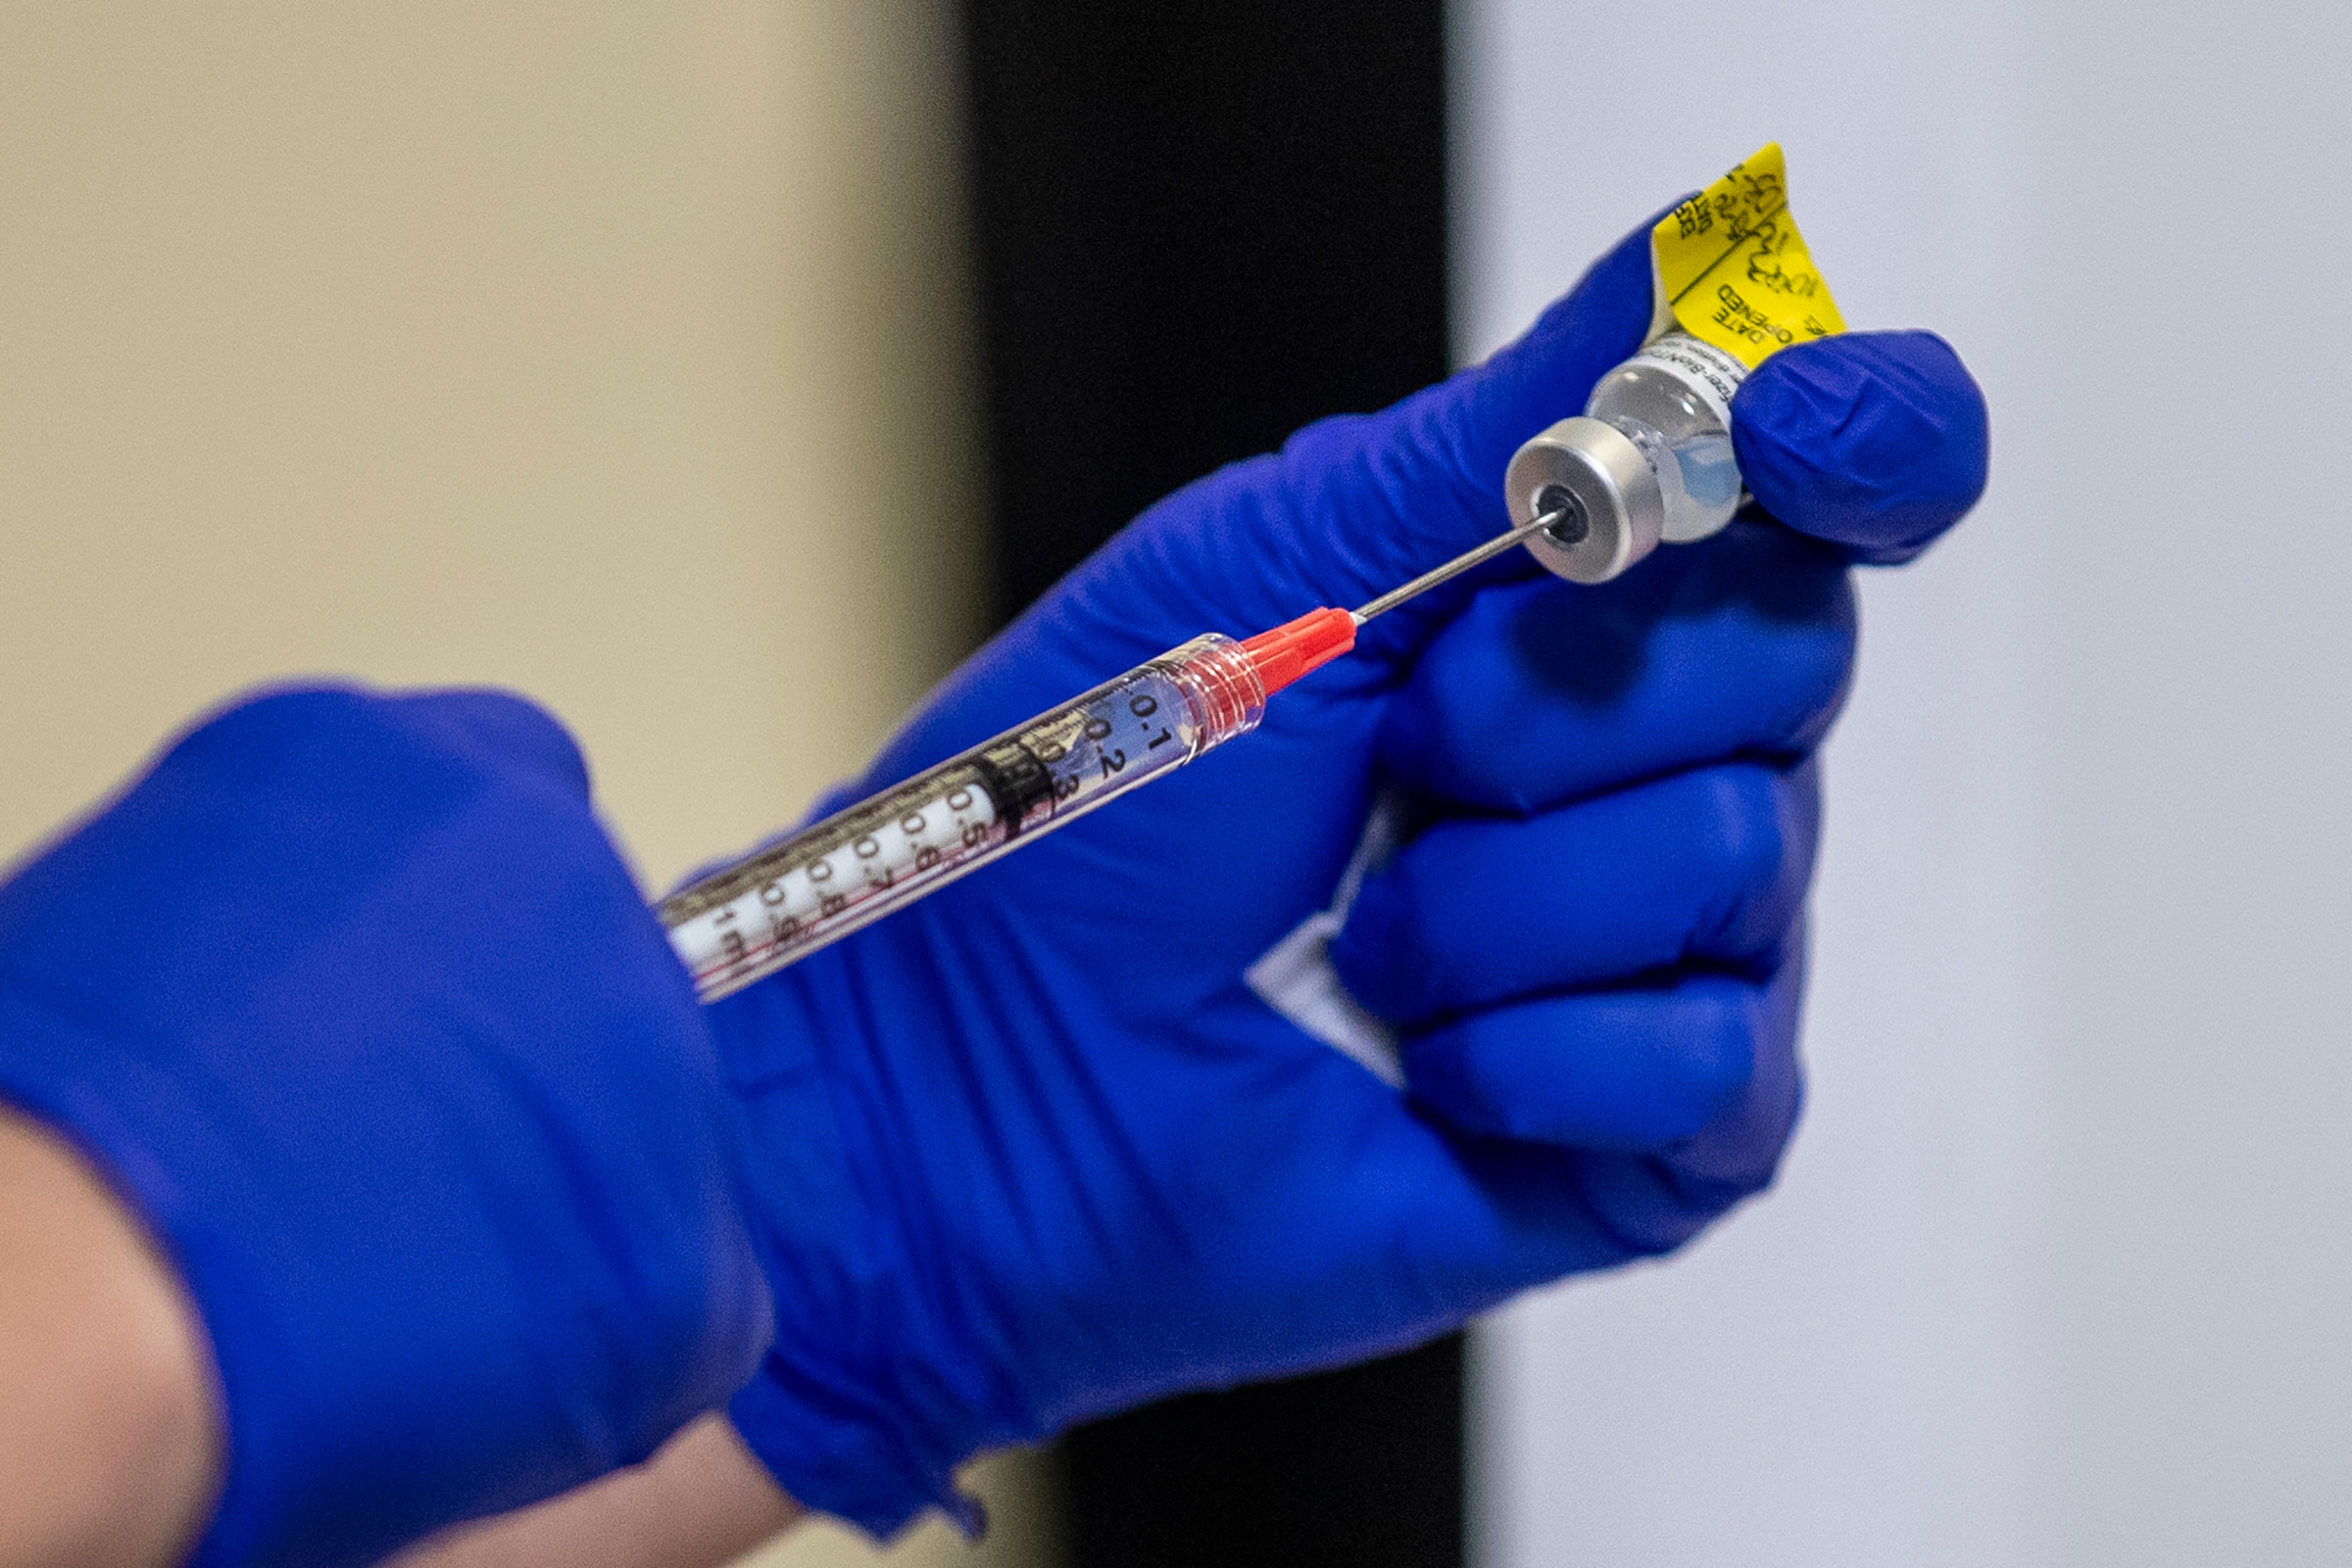 The Pfizer-BioNTech Covid-19 vaccine is prepared prior to a vaccine event at Kaiser Permanente Capitol Hill Medical Center on December 17 in Washington, DC.